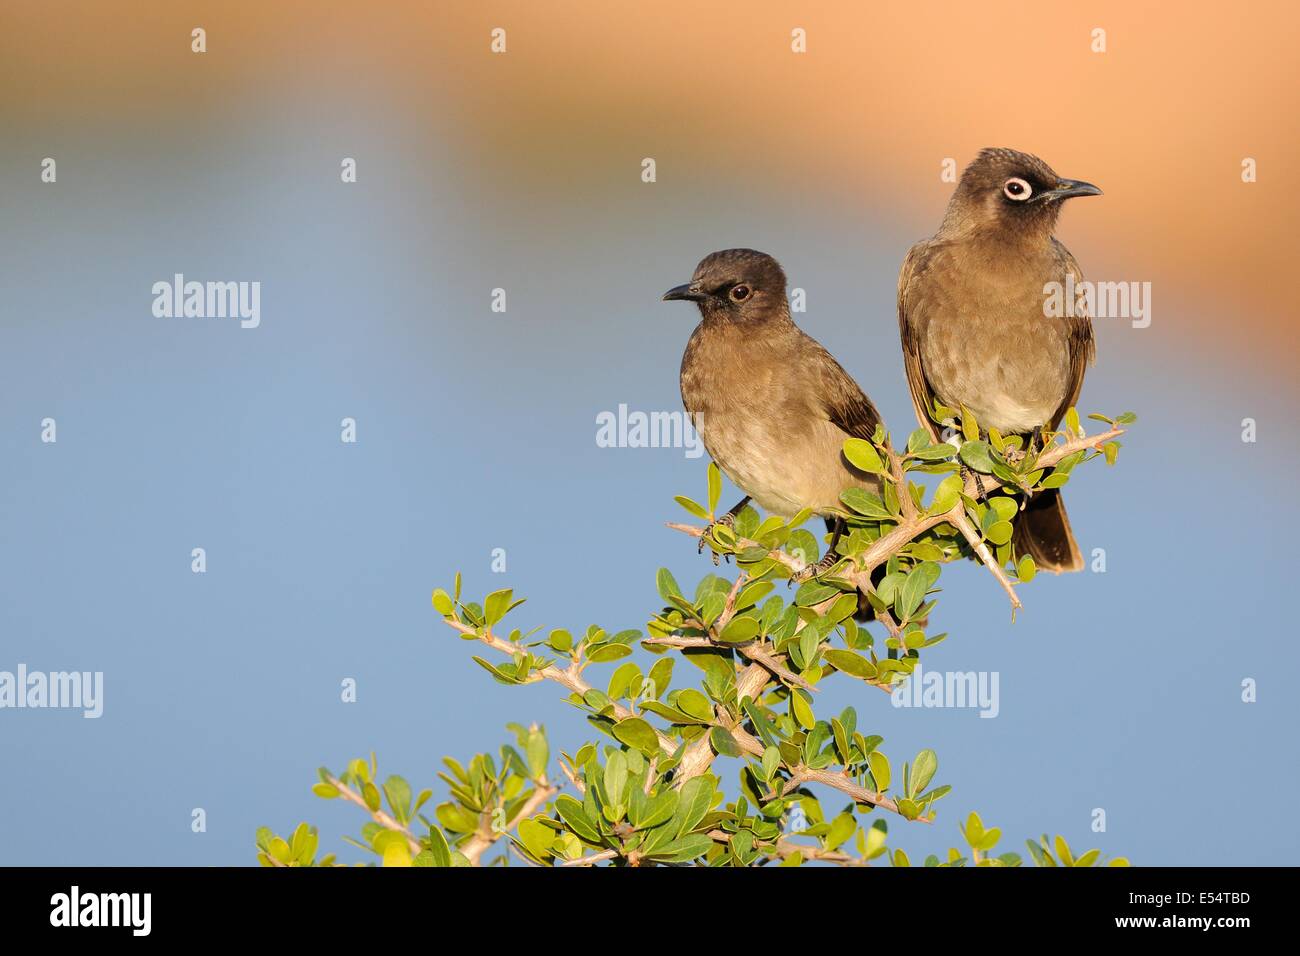 Two Cape Bulbuls (Pycnonotus capensis), juvenile on the left, Addo National Park, Eastern Cape, South Africa, Africa Stock Photo